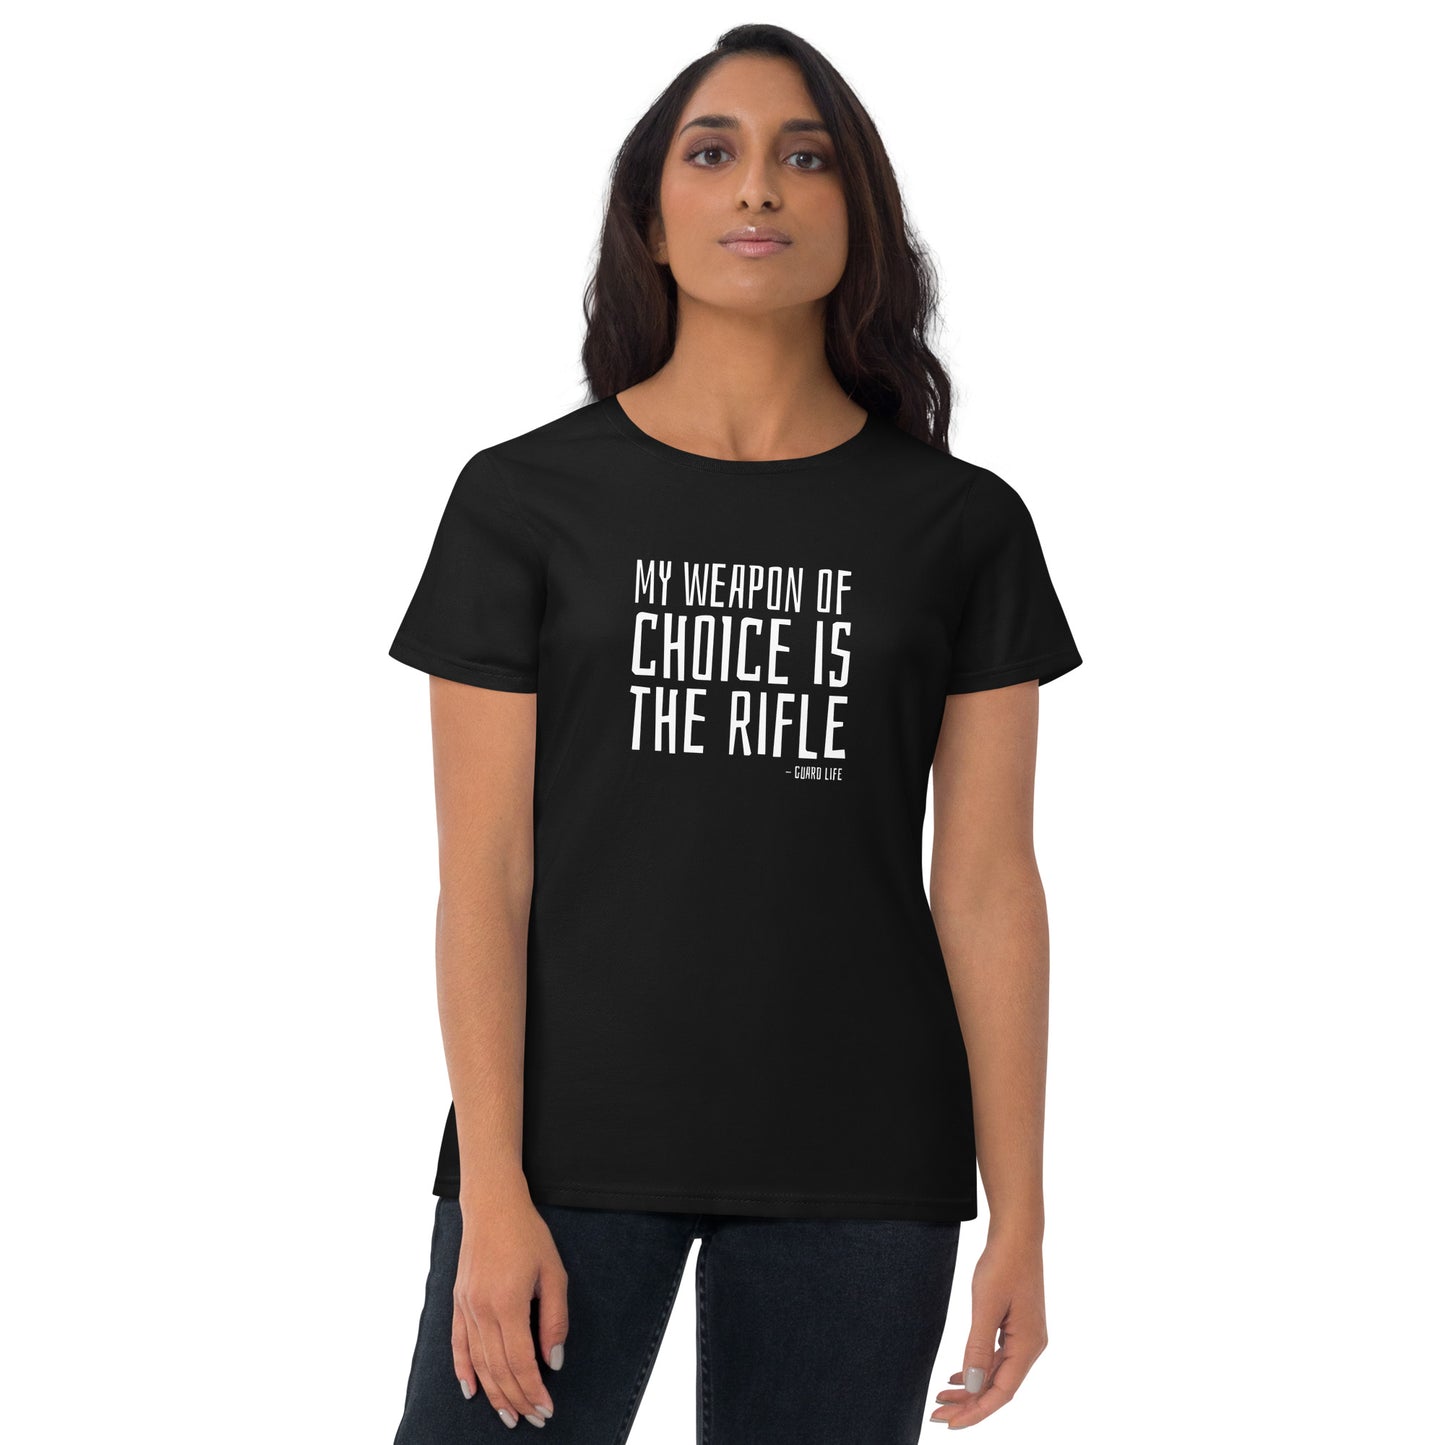 My weapon of choice is the Rifle (Color Guard) Women's Fashion Fit T-shirt